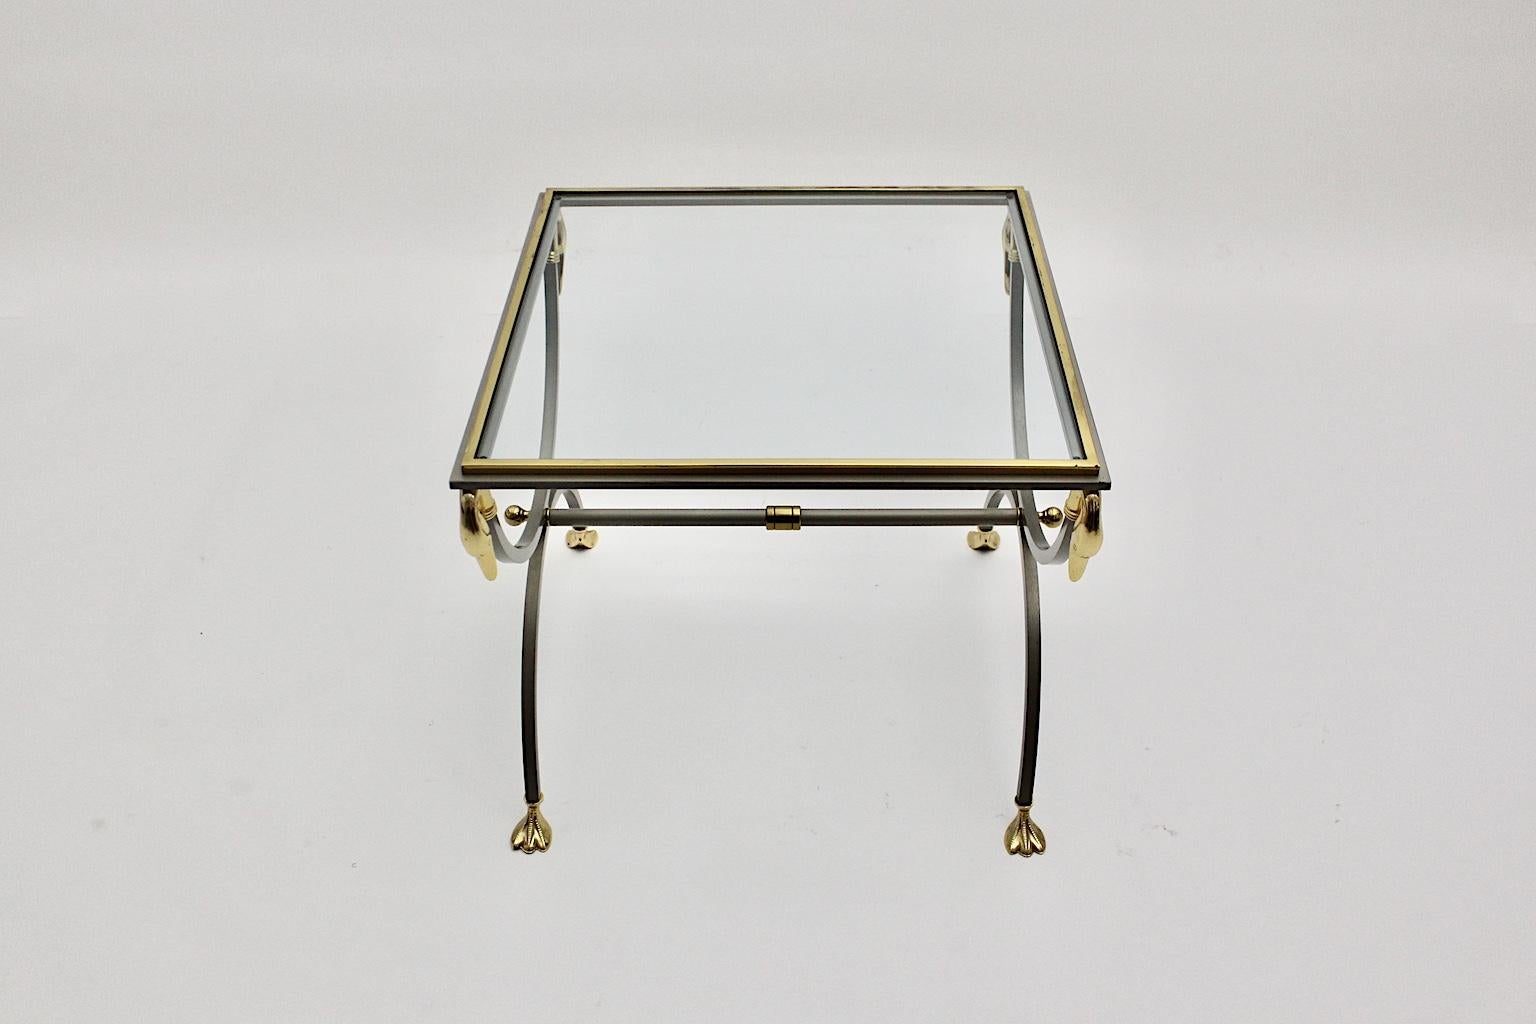 Maison Jansen Vintage Gold Stainless Steel Coffee Table circa 1970 France For Sale 1